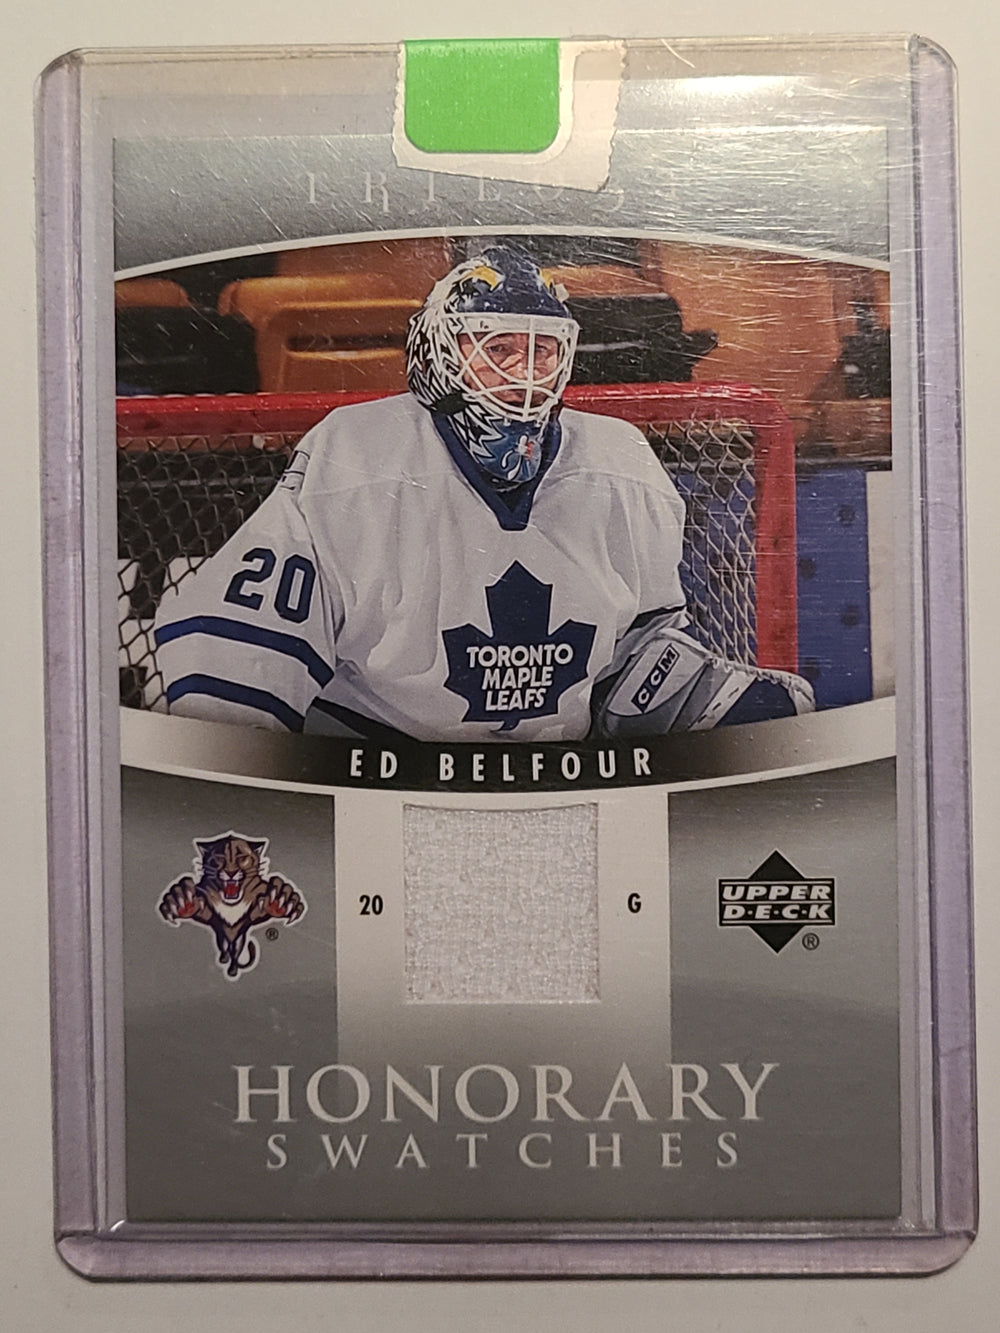 2006-07 Trilogy Honorary Swatches #HS-EB Ed Belfour Florida Panthers